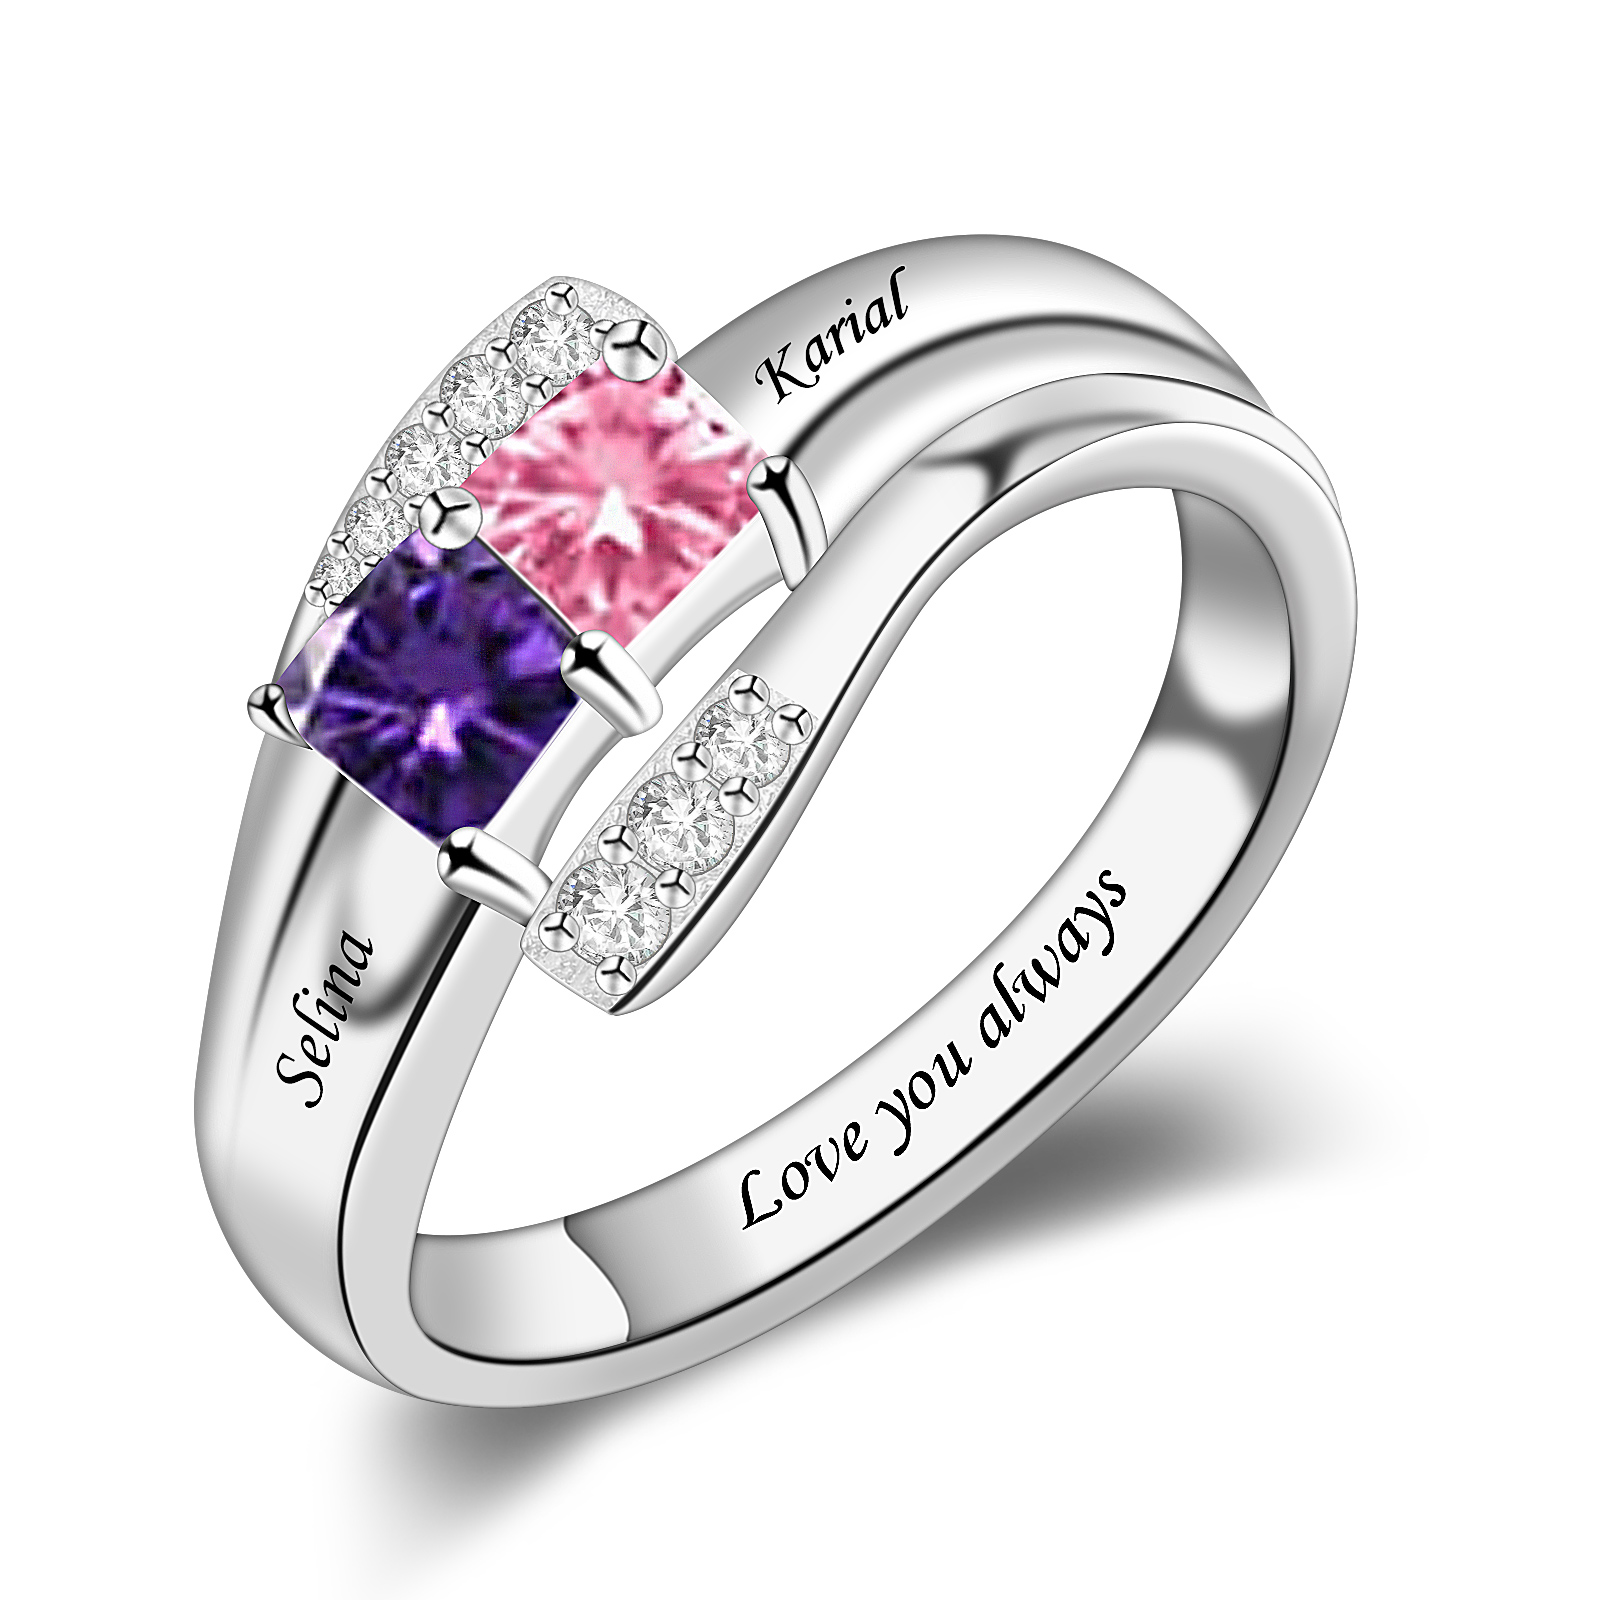 R5-1-2 Personalized Mothers Ring Birthstone and Engraved Name (1-9 Stones)